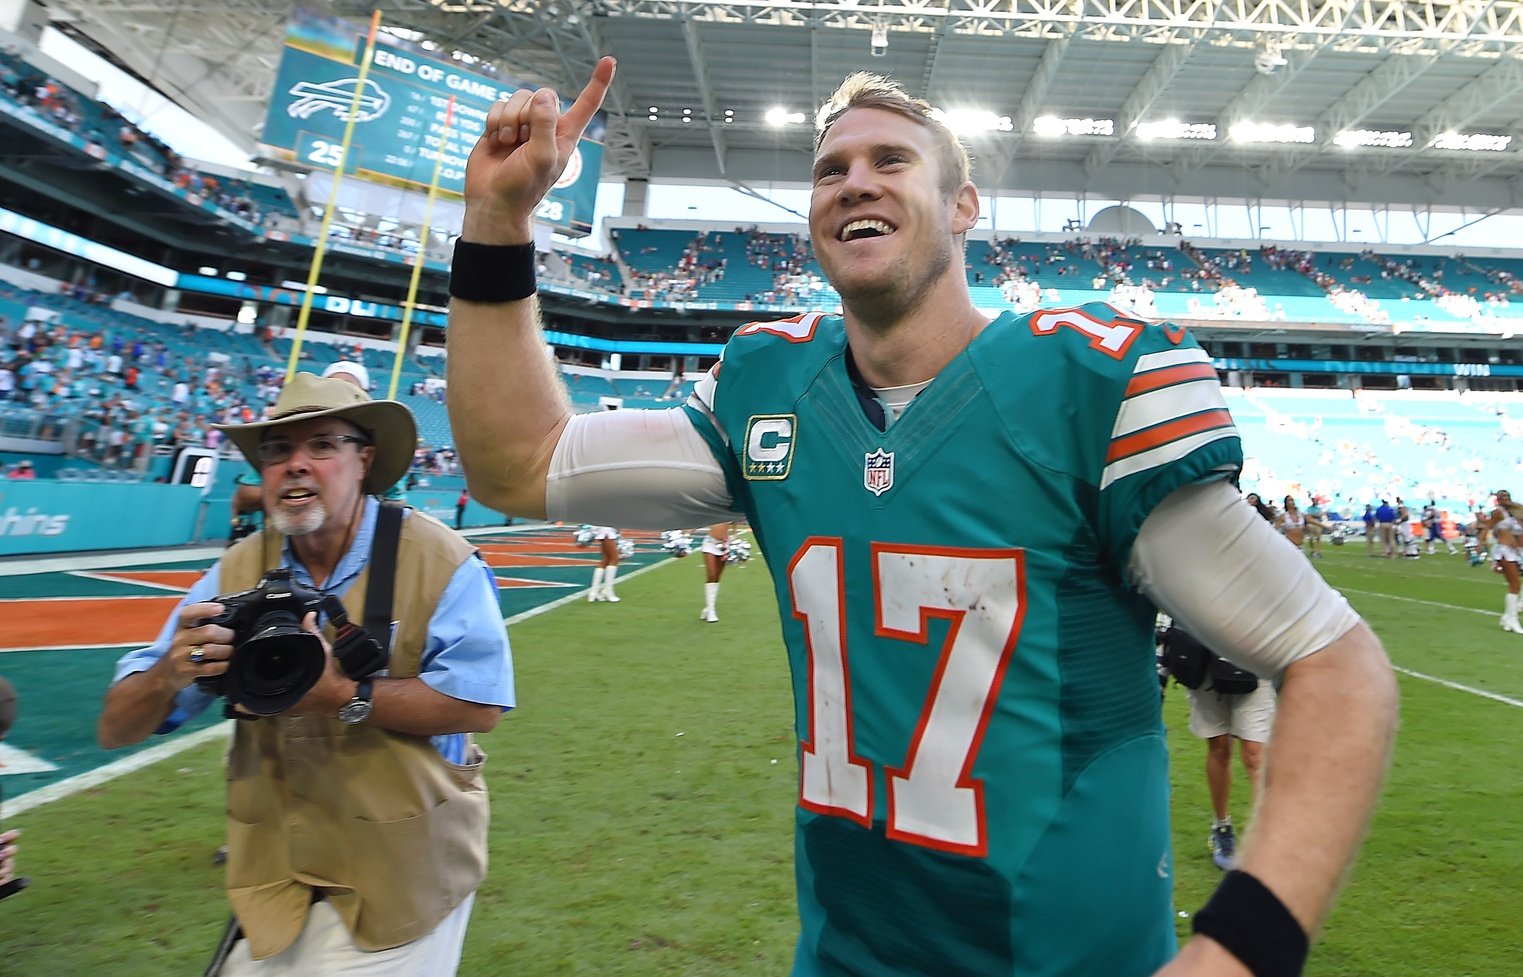 Dolphins commit to Ryan Tannehill as starter for next season1523 x 977